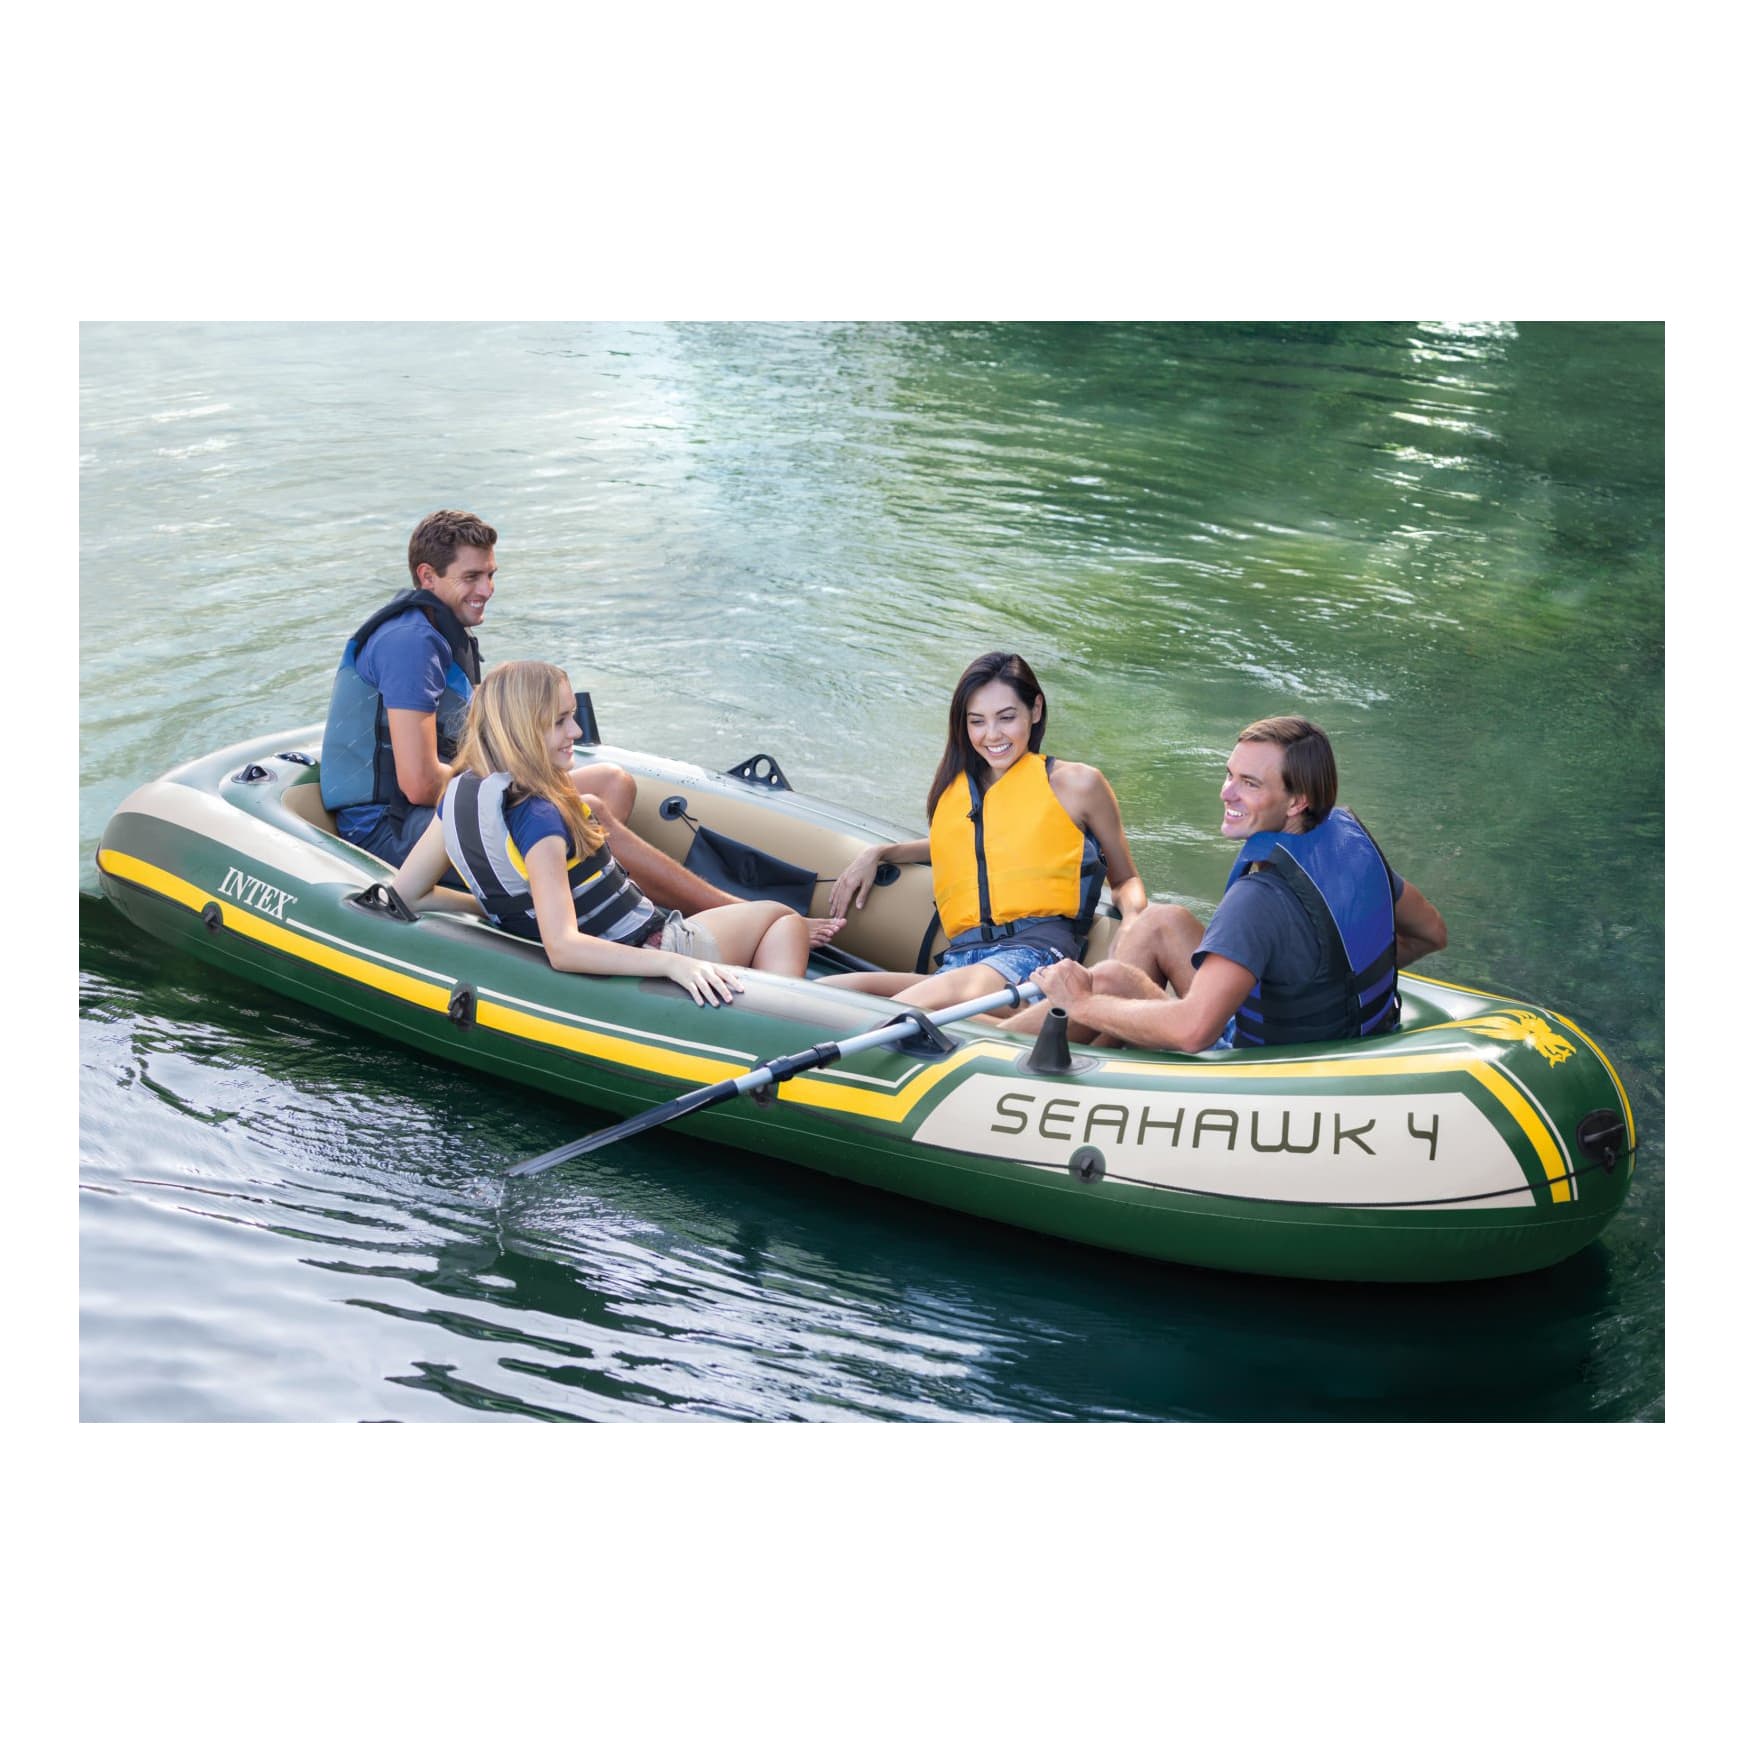 Intex Seahawk 4 Inflatable Boat Kit - In the Field